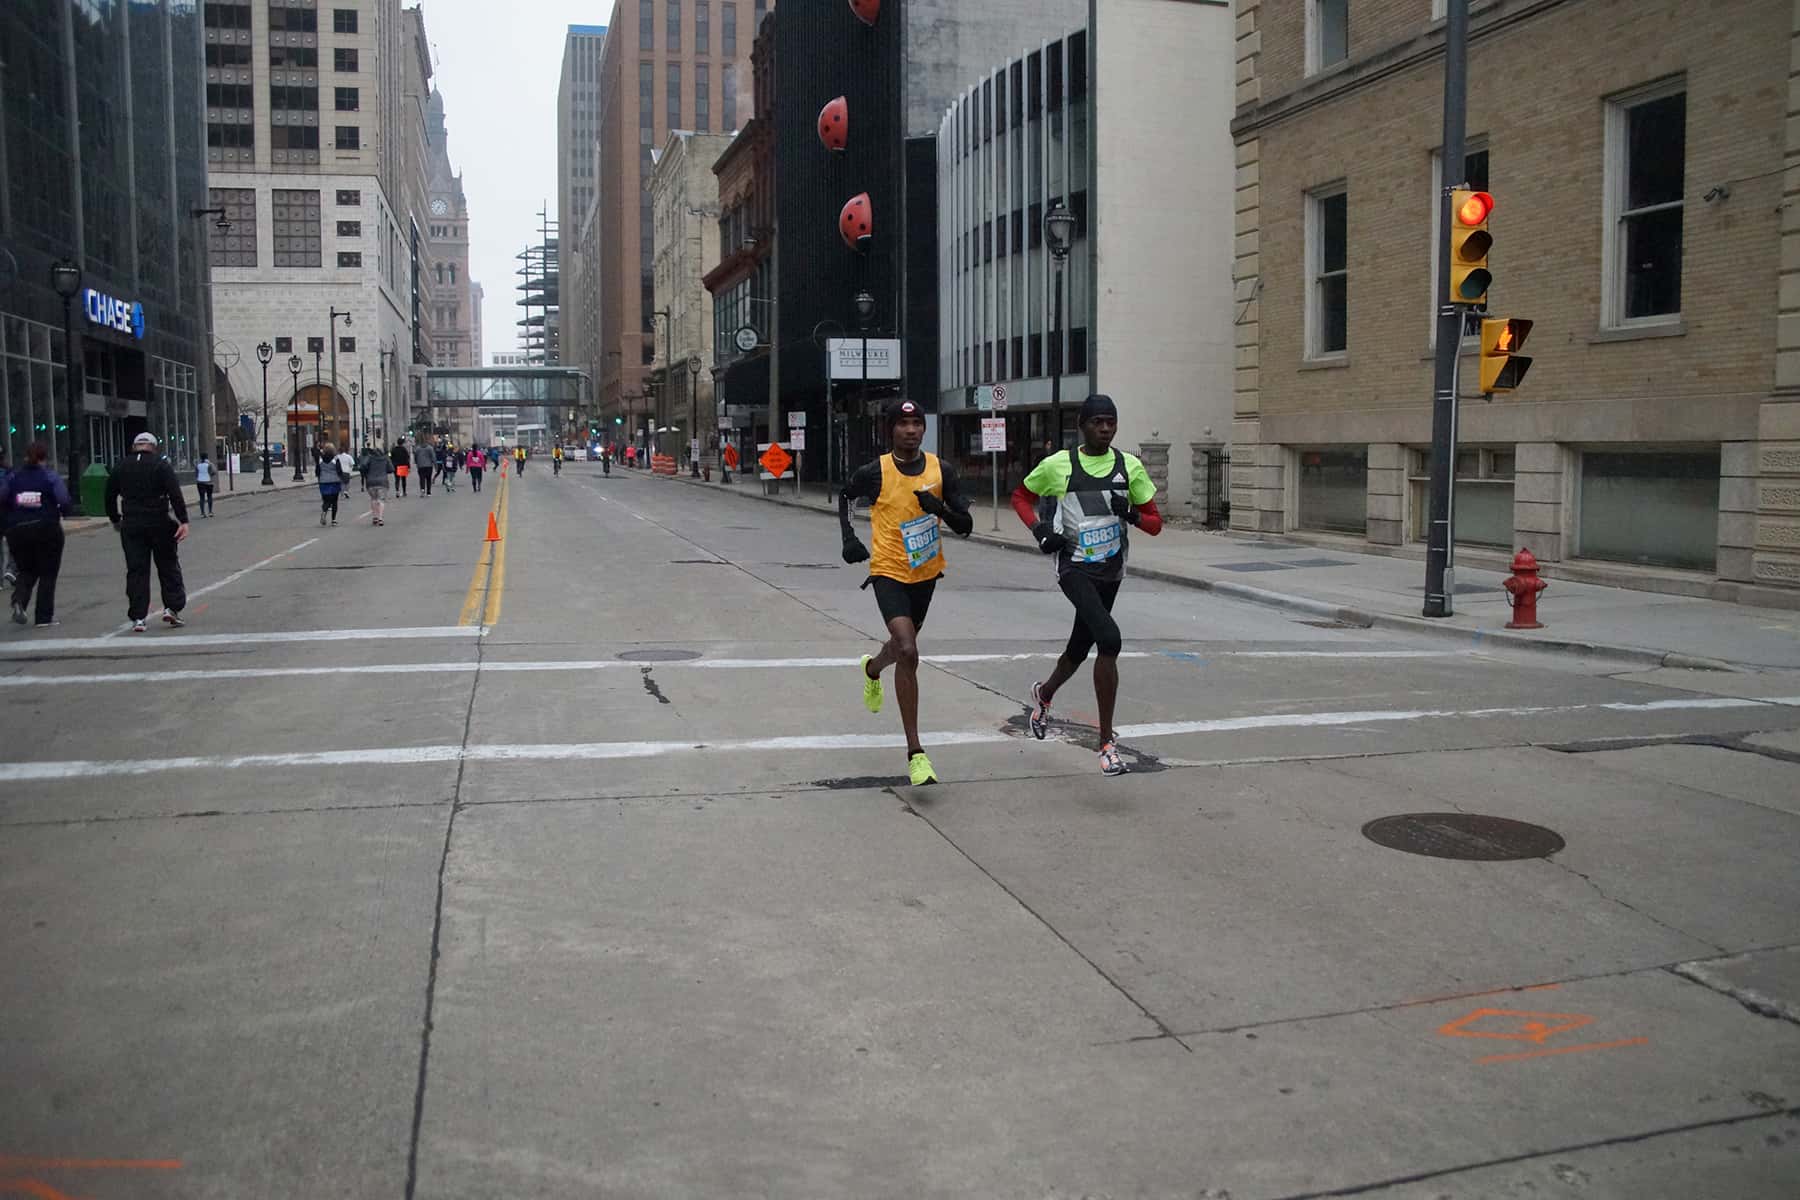 Revival of Milwaukee Marathon succeeds in filling city streets with